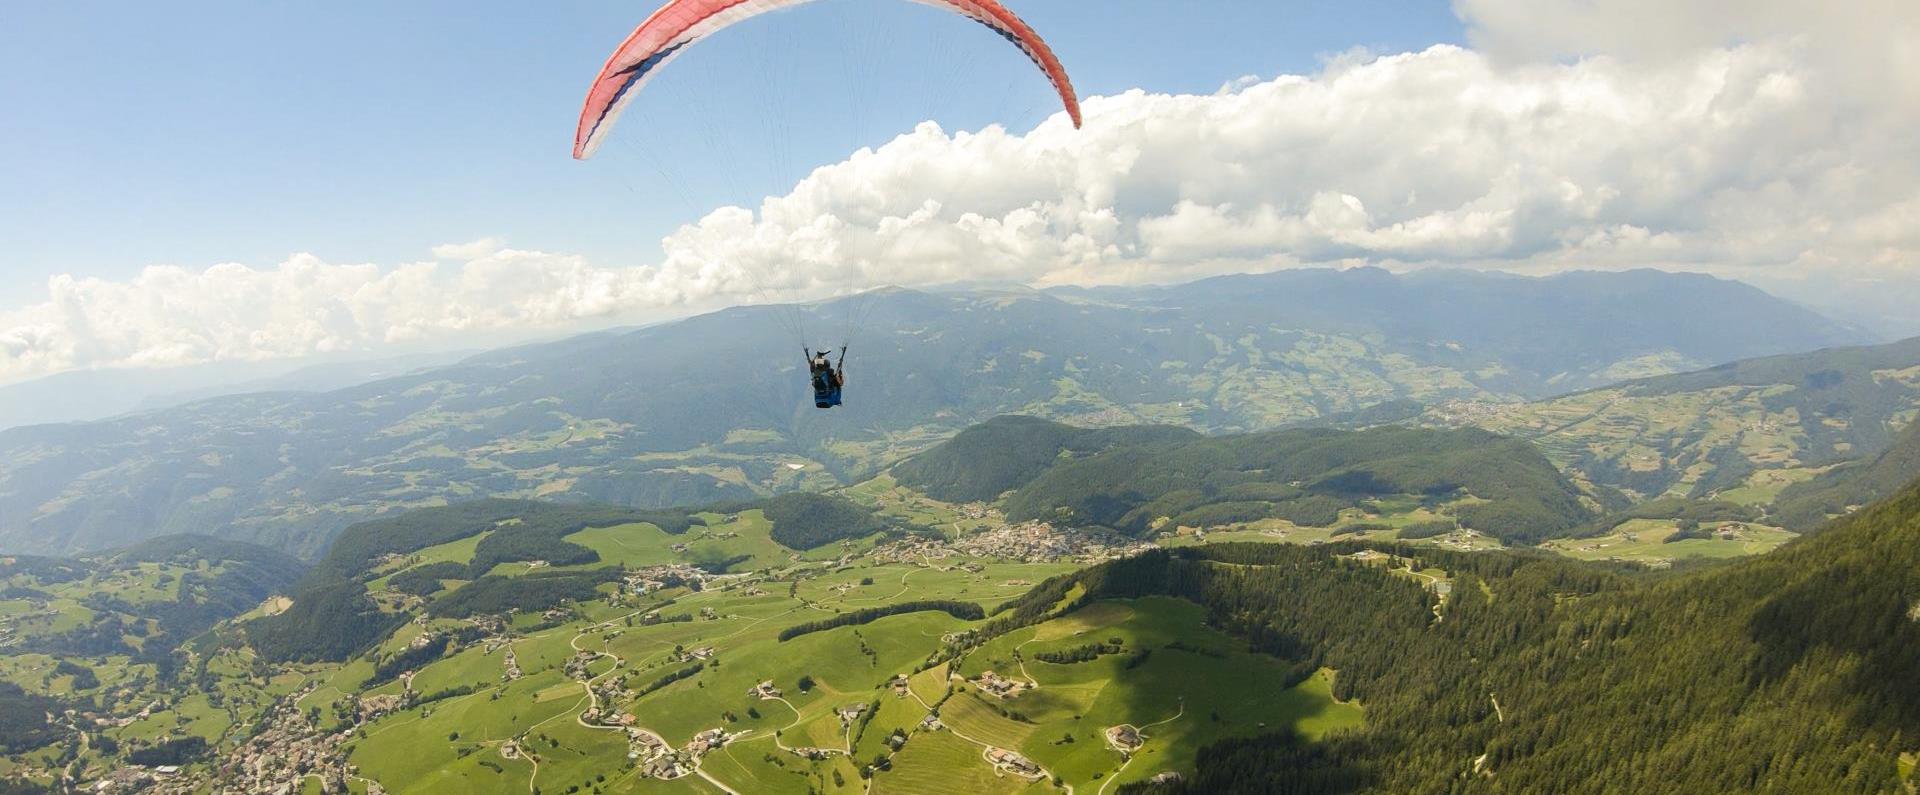 Paragliding with a view of the Alpe di Siusi & the western Dolomites